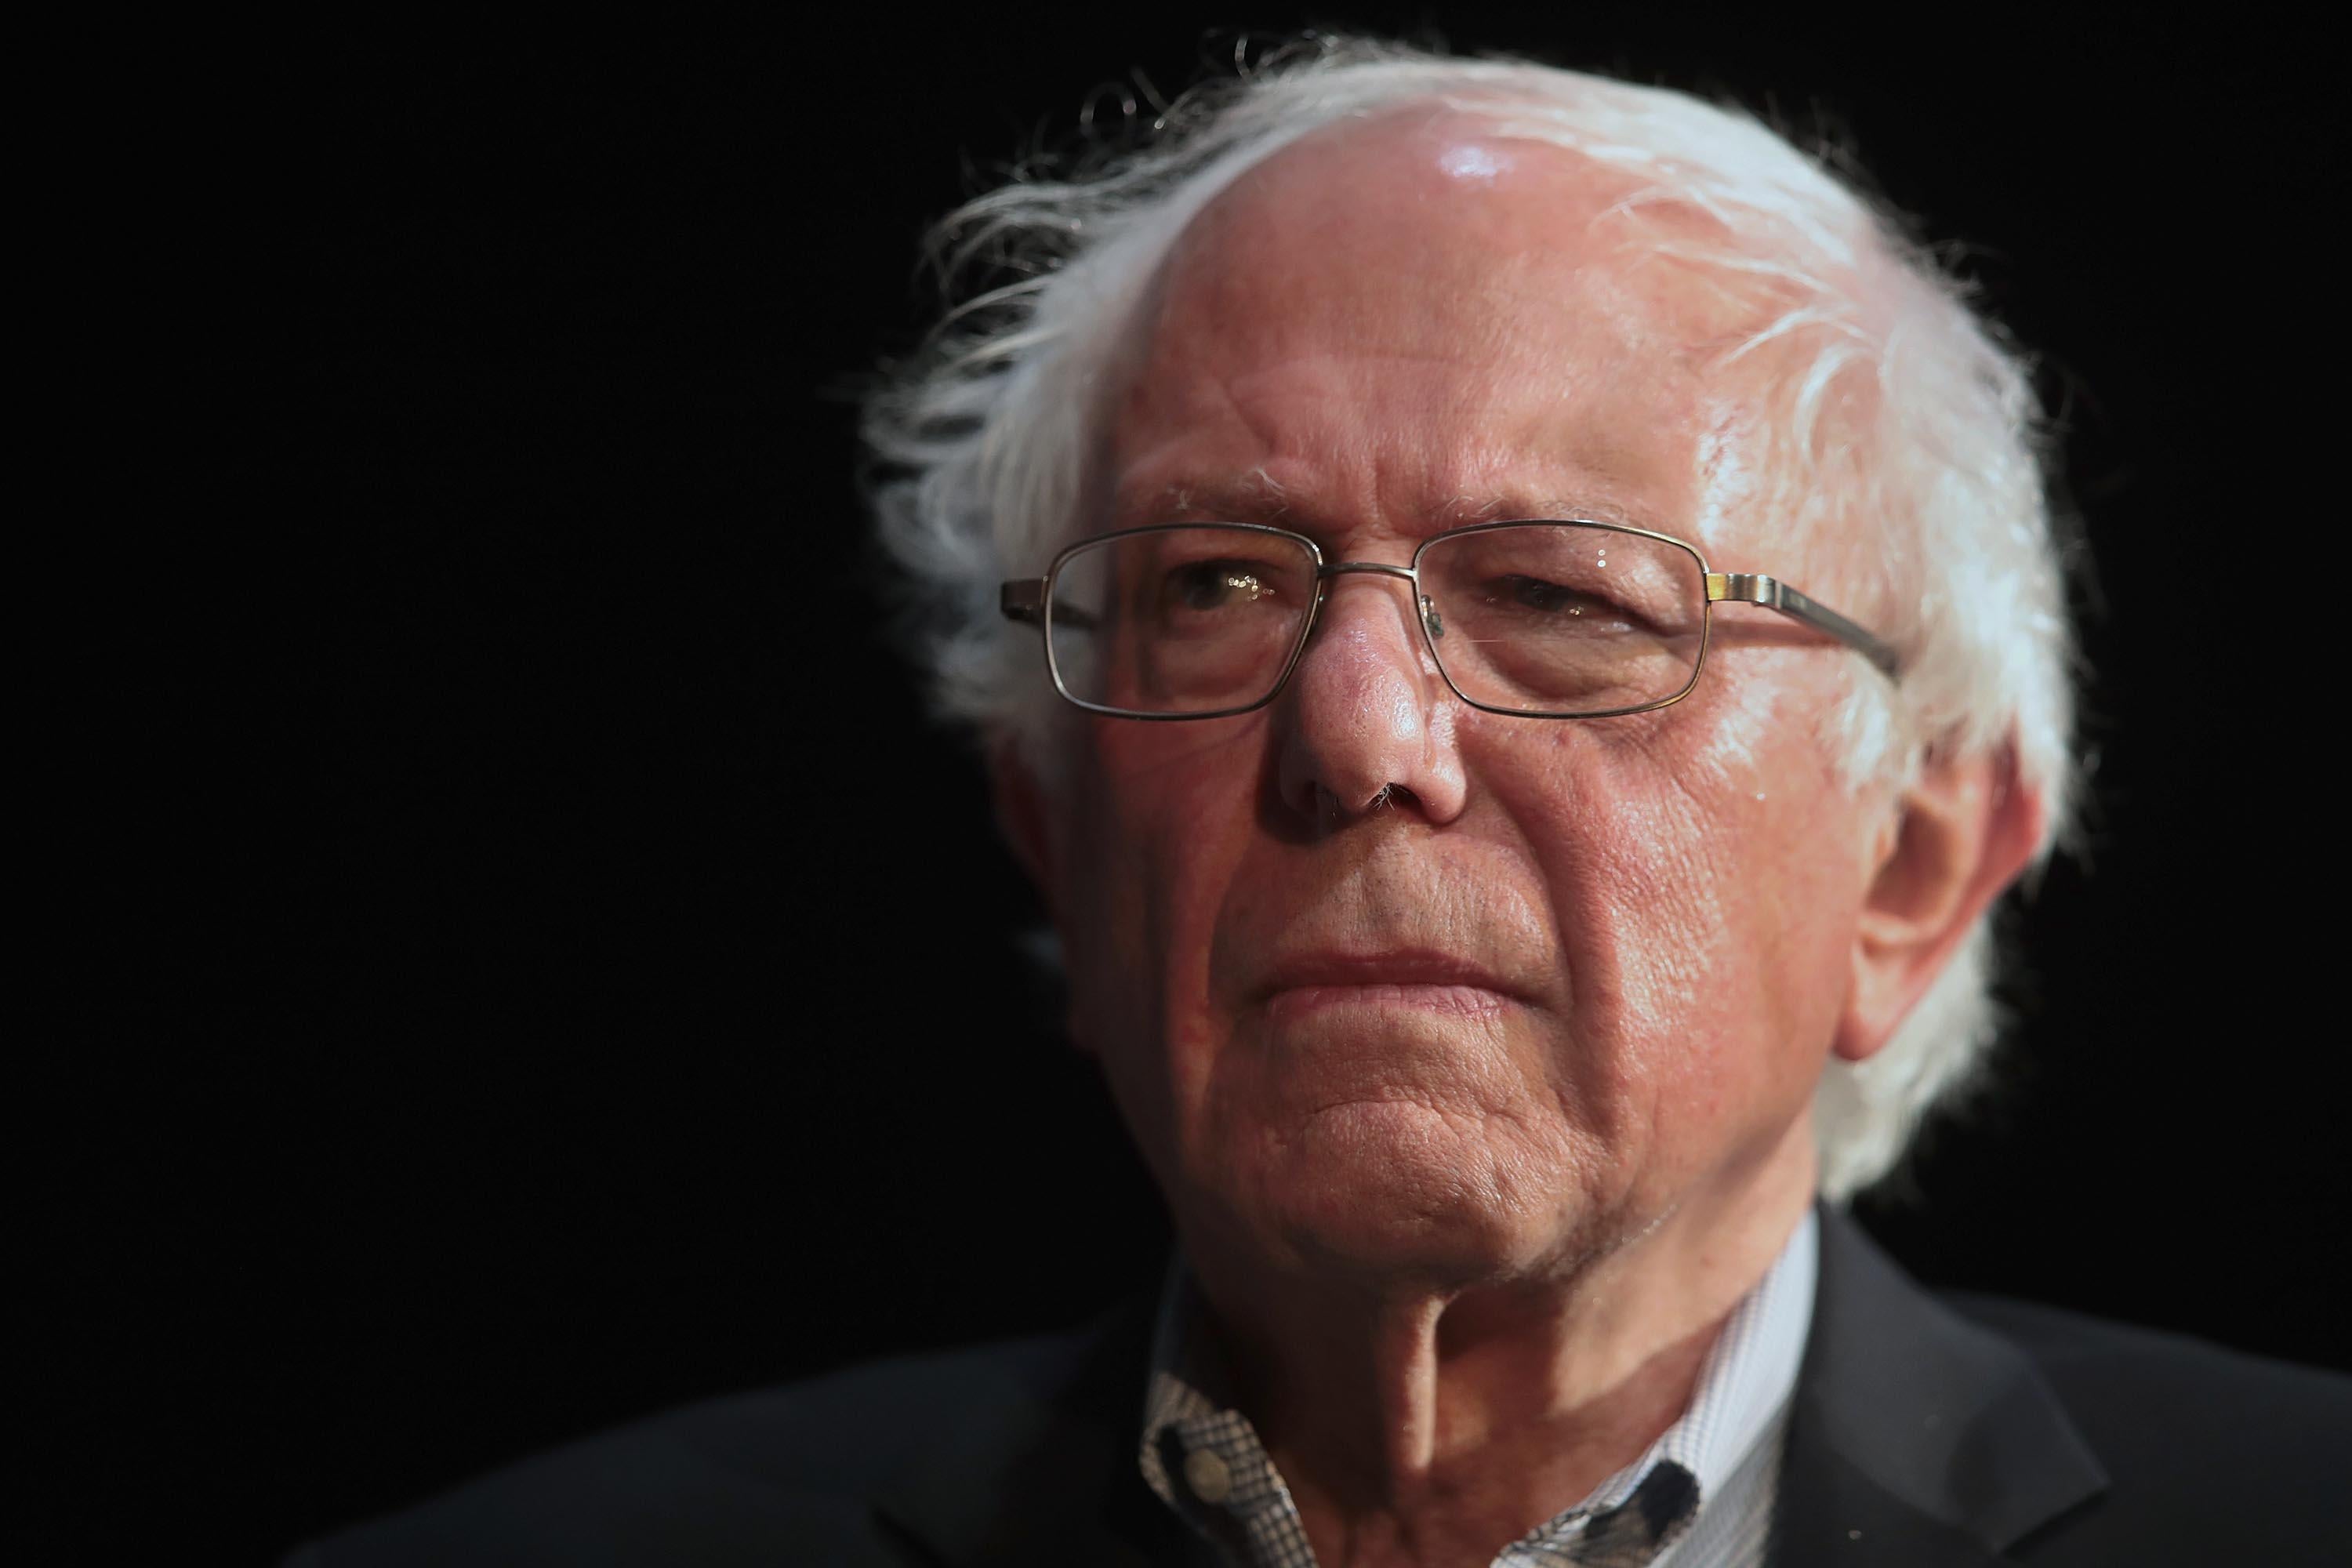 MUSCATINE, IOWA - APRIL 06: Democratic presidential candidate Senator Bernie Sanders (I-VT) host a campaign rally at the Fairfield Arts and Convention Center on April 06, 2019 in Fairfield, Iowa. The event is the final of three campaign events Sanders held in the state today.  (Photo by Scott Olson/Getty Images)